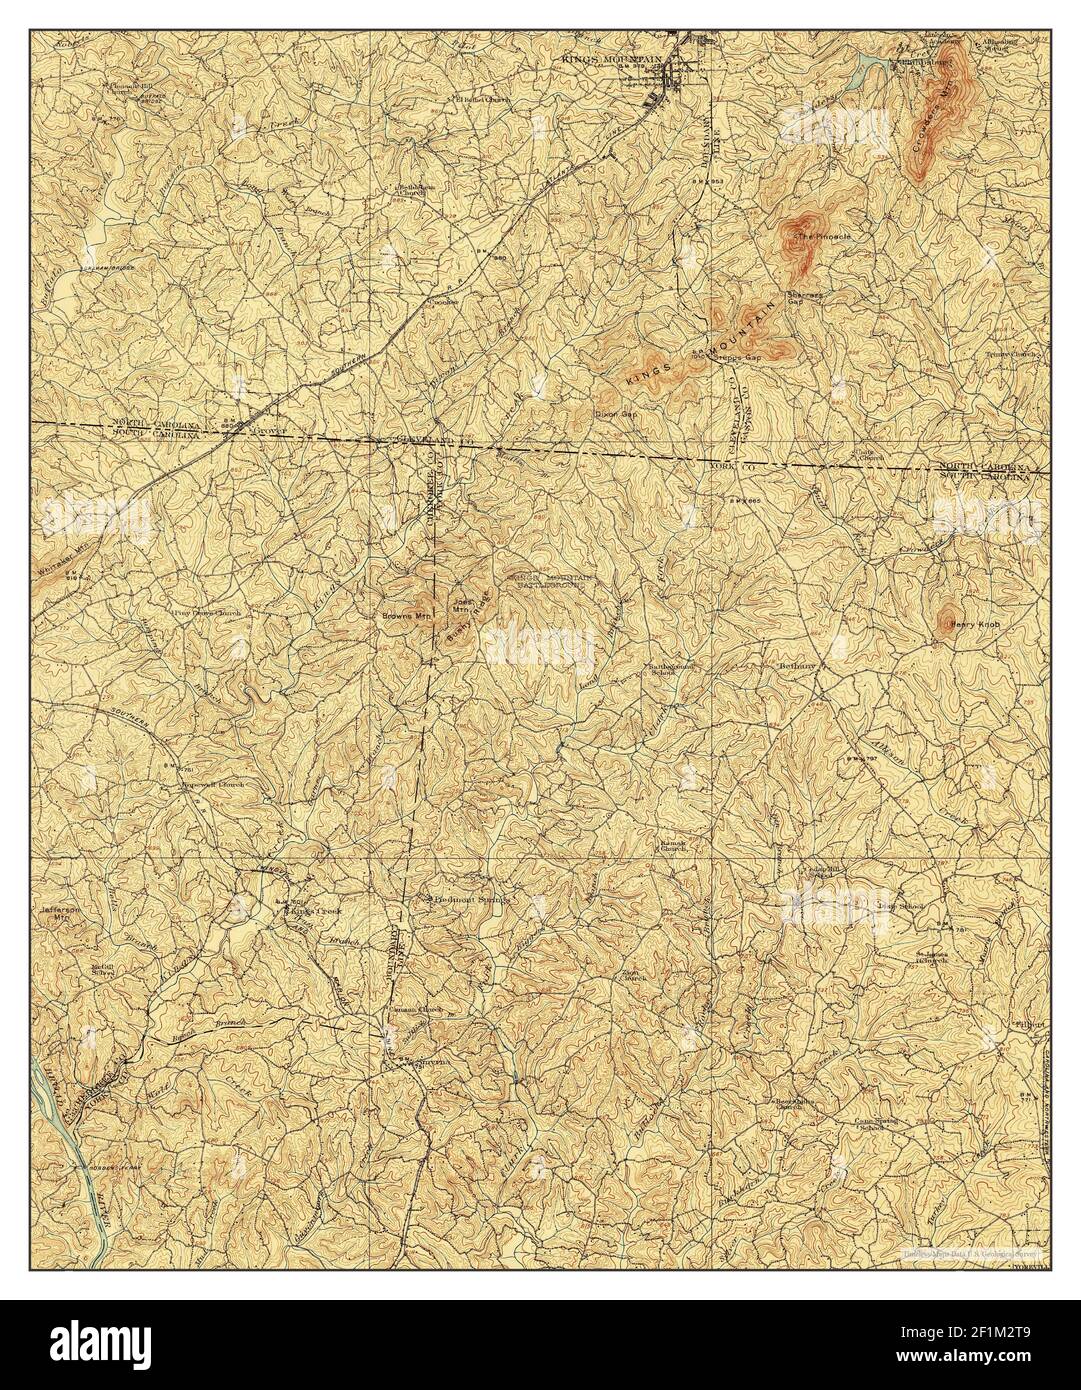 Kings Mountain, North Carolina, map 1908, 1:62500, United States of America by Timeless Maps, data U.S. Geological Survey Stock Photo